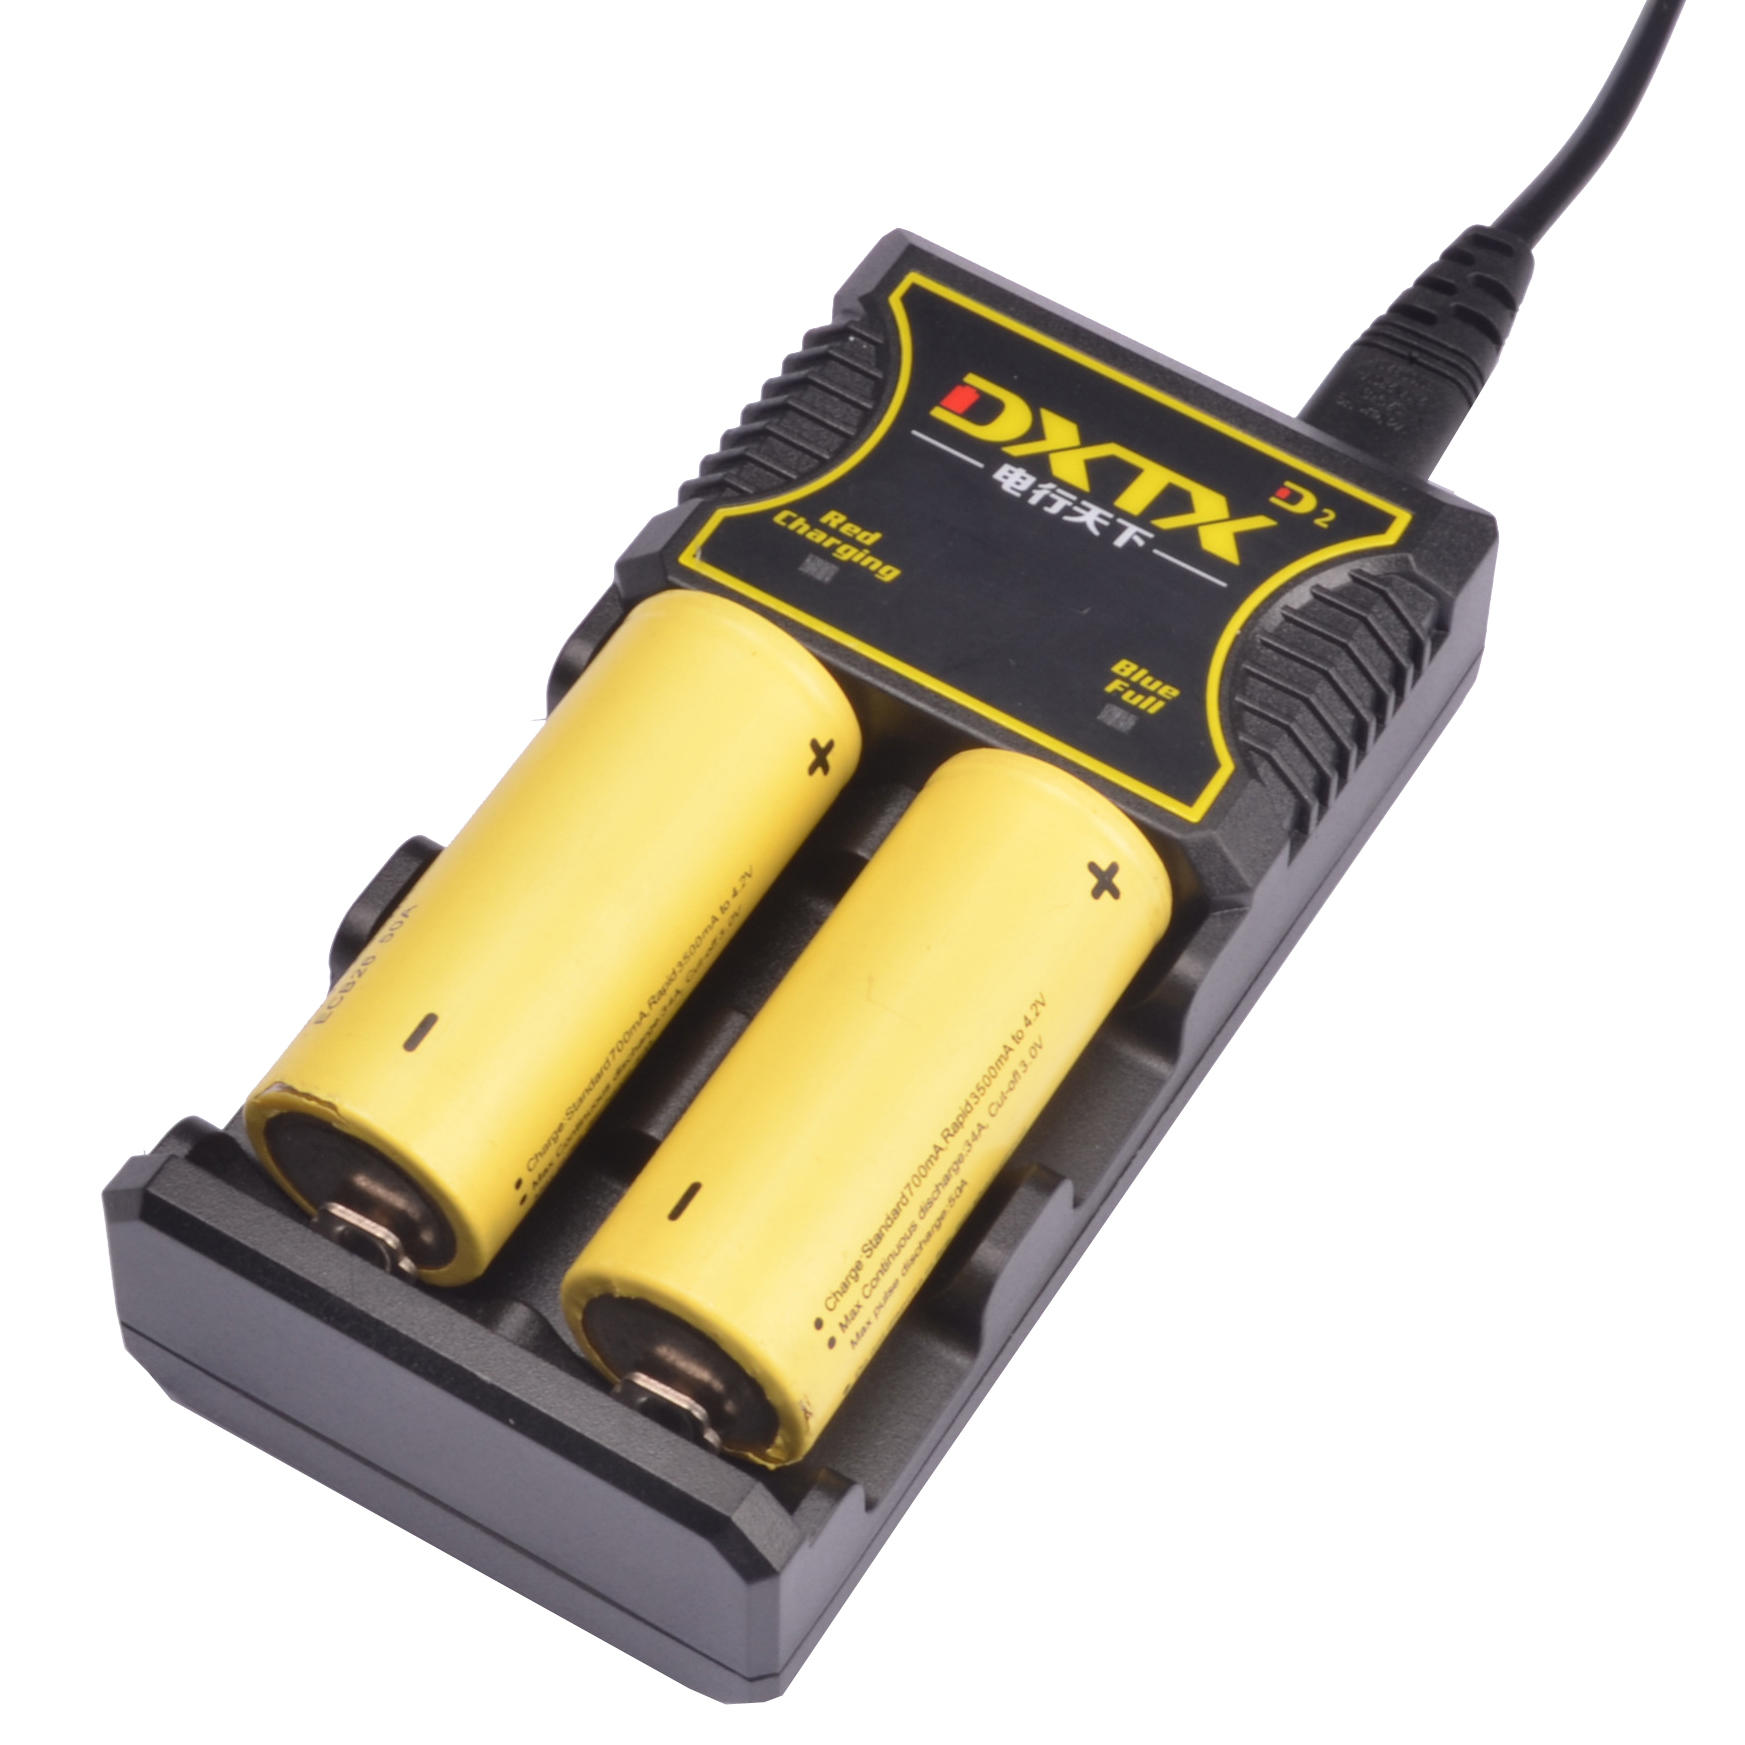 

DXTX D2 220V 5V2A Dual Slot Universal Intelligent Portable USB Lithium Li-Battery Charger Compatible With Ni-MH/18650/26